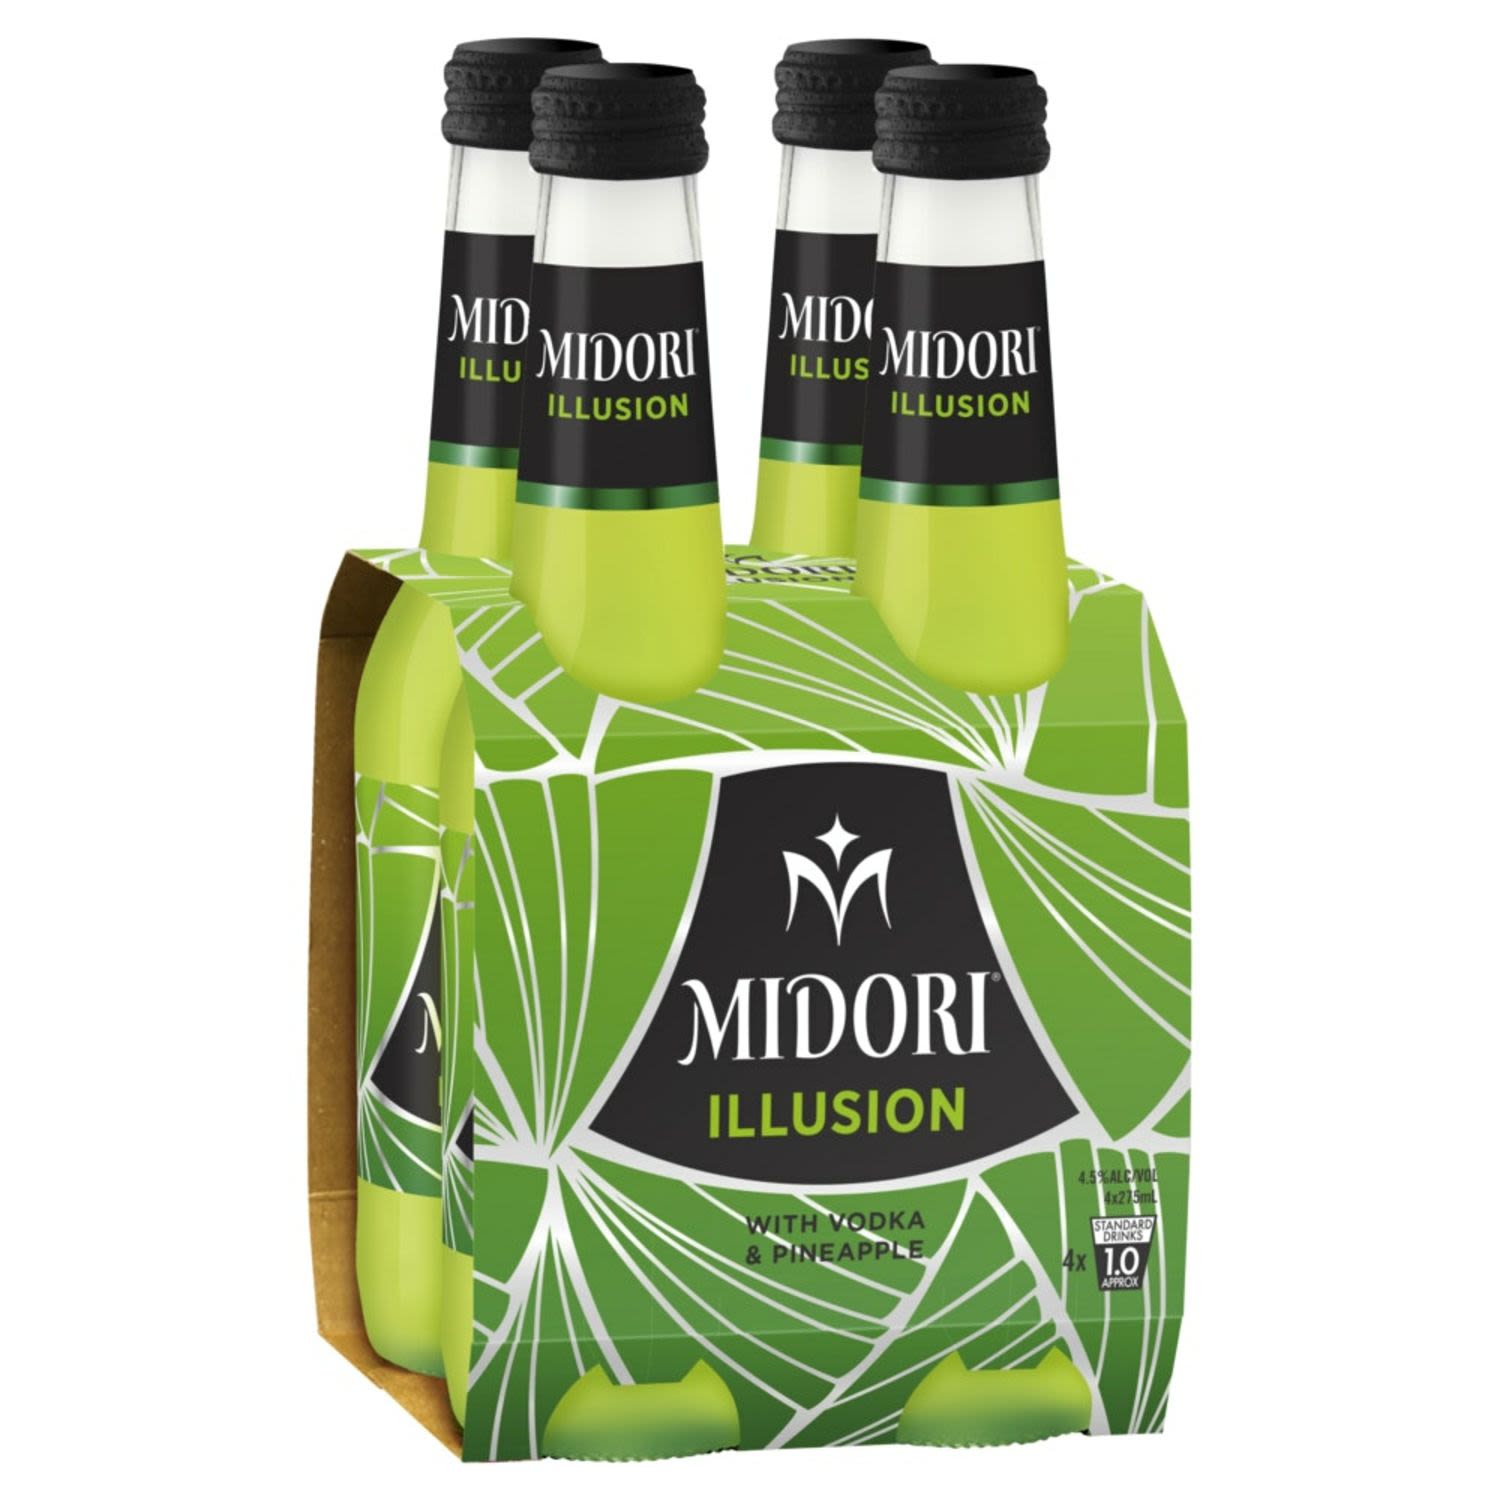 MIDORI Illusion is the quintessential Australian summer cocktail. A mouth-watering combination of MIDORI and refreshing pineapple, with a hint of vodka gives you the fresh taste of summer all year round.<br /> <br />Alcohol Volume: 4.50%<br /><br />Pack Format: 4 Pack<br /><br />Standard Drinks: 0.9</br /><br />Pack Type: Bottle<br />